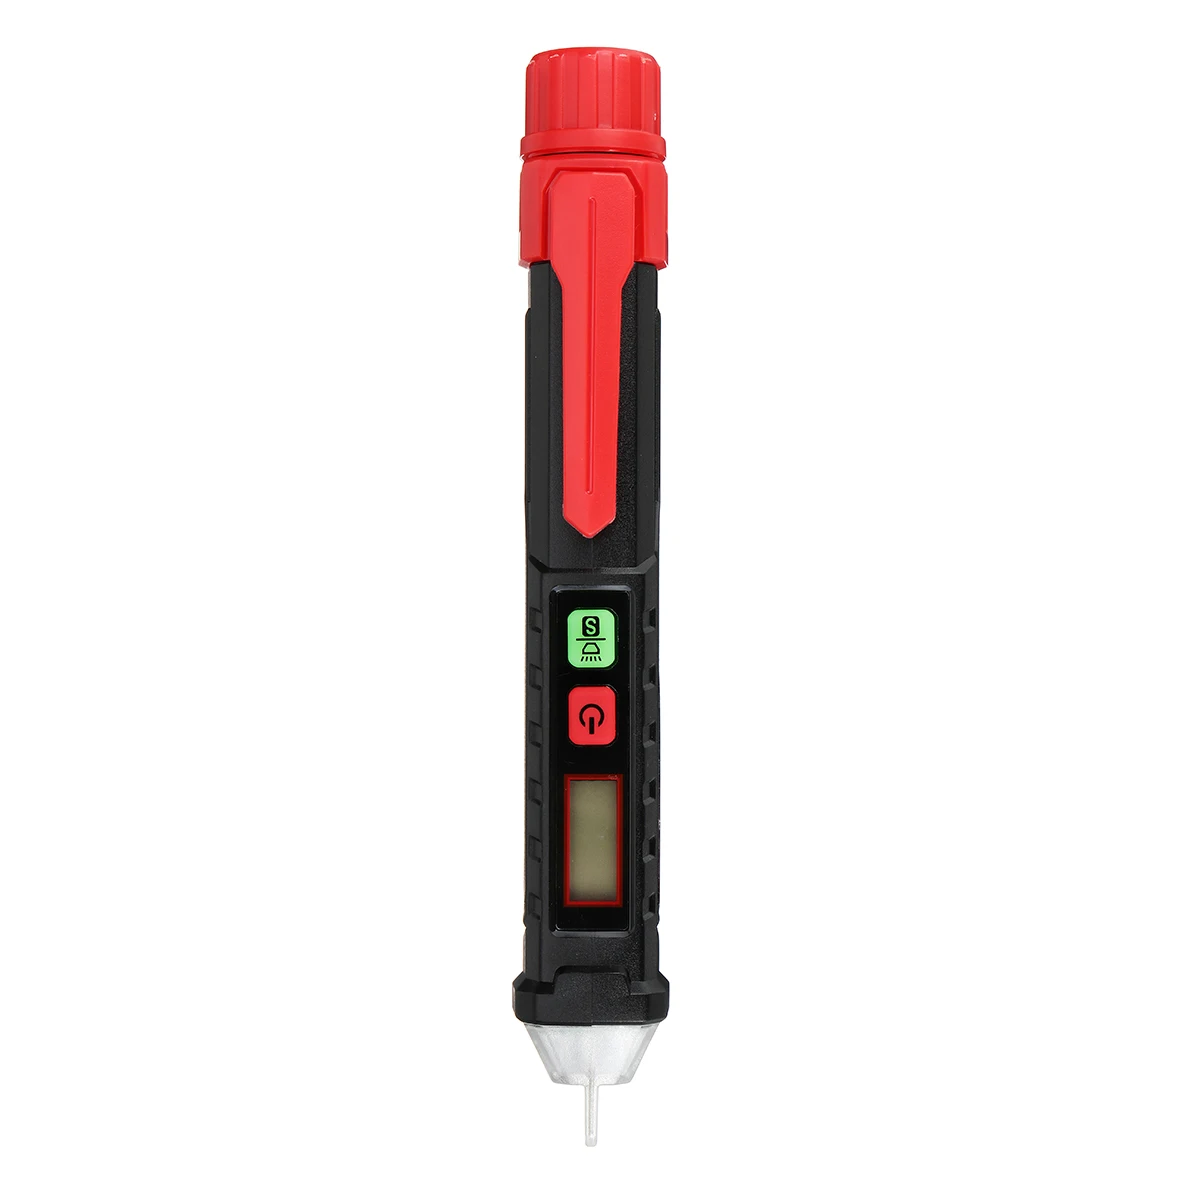 ZEAST AC/DC Digital Display Multi-function Induction Test Pencil Sound/Light Alarm AC / 12~1000V Non-Contact Voltage Detector